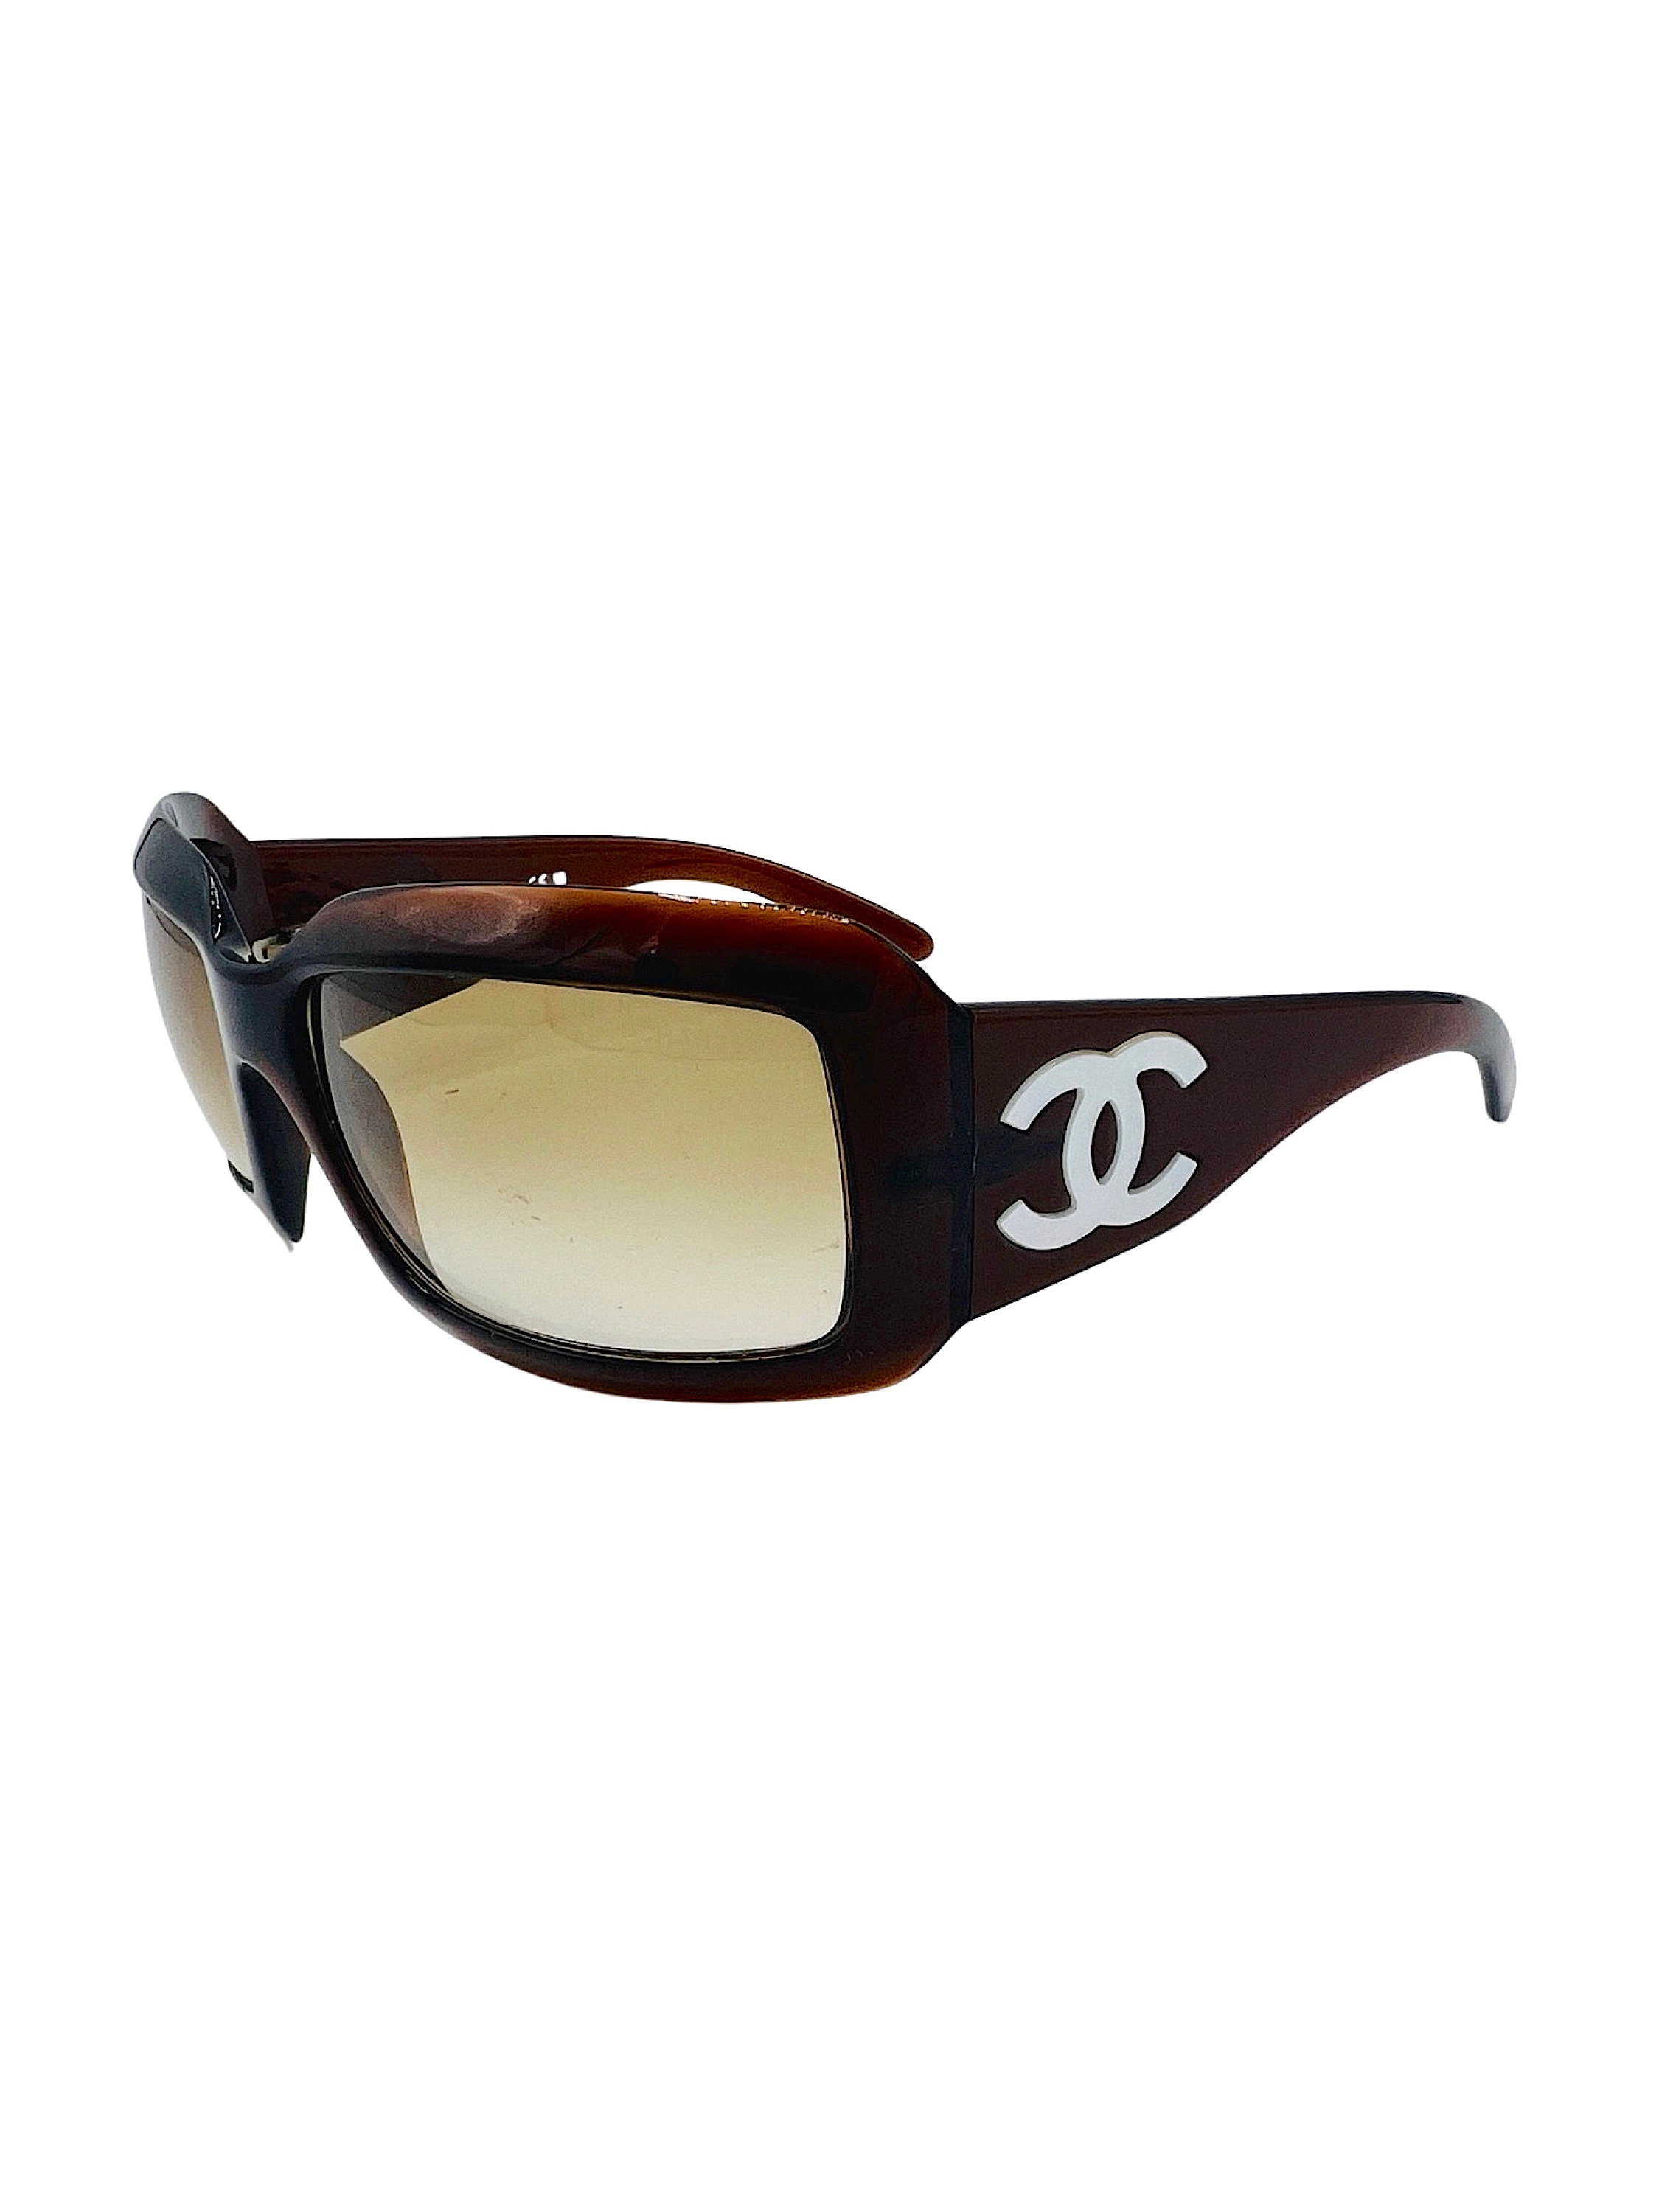 chanel sunglasses with mother of pearl